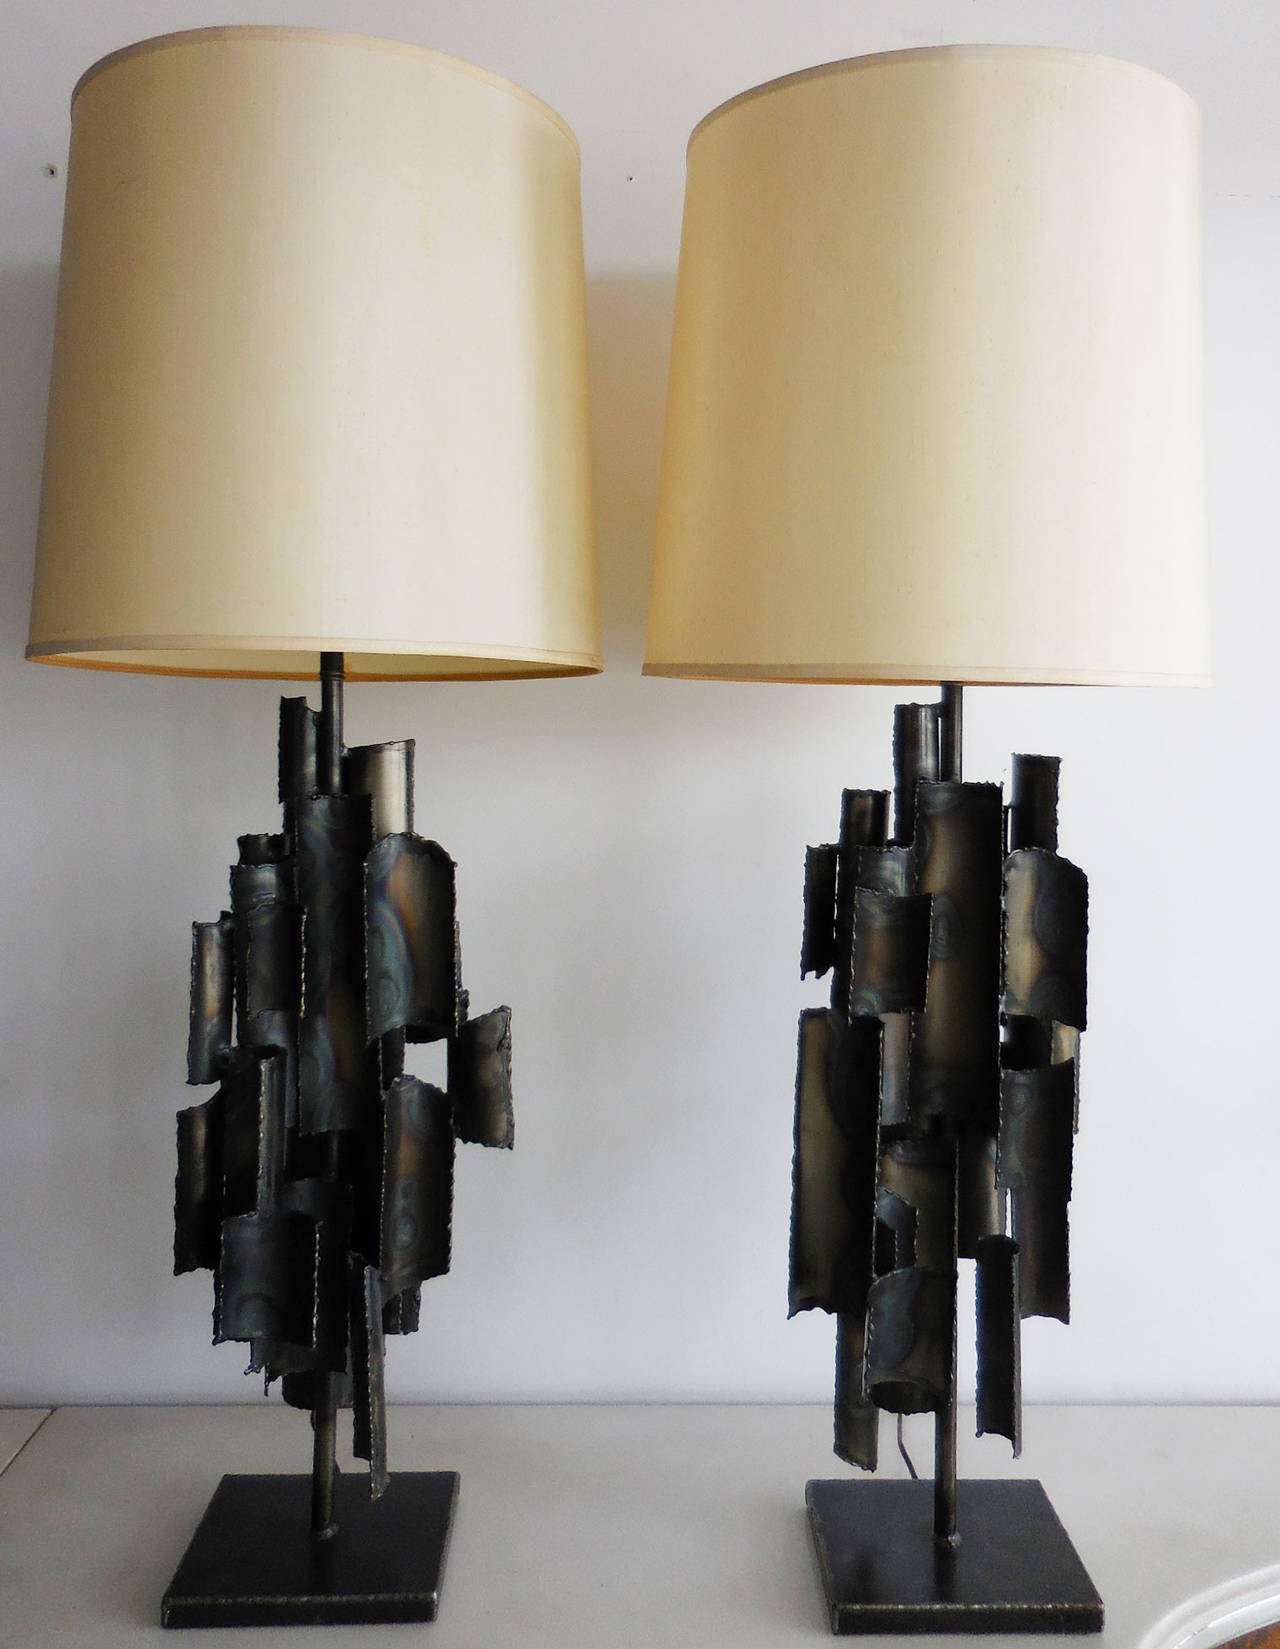 A monumental pair of sculptural lamps. Conceived as a pair each lamp is a unique artistic creation with it's own design and individual nuances. Spectacular from any angle. Both signed on bottom. Shades diameter is 18